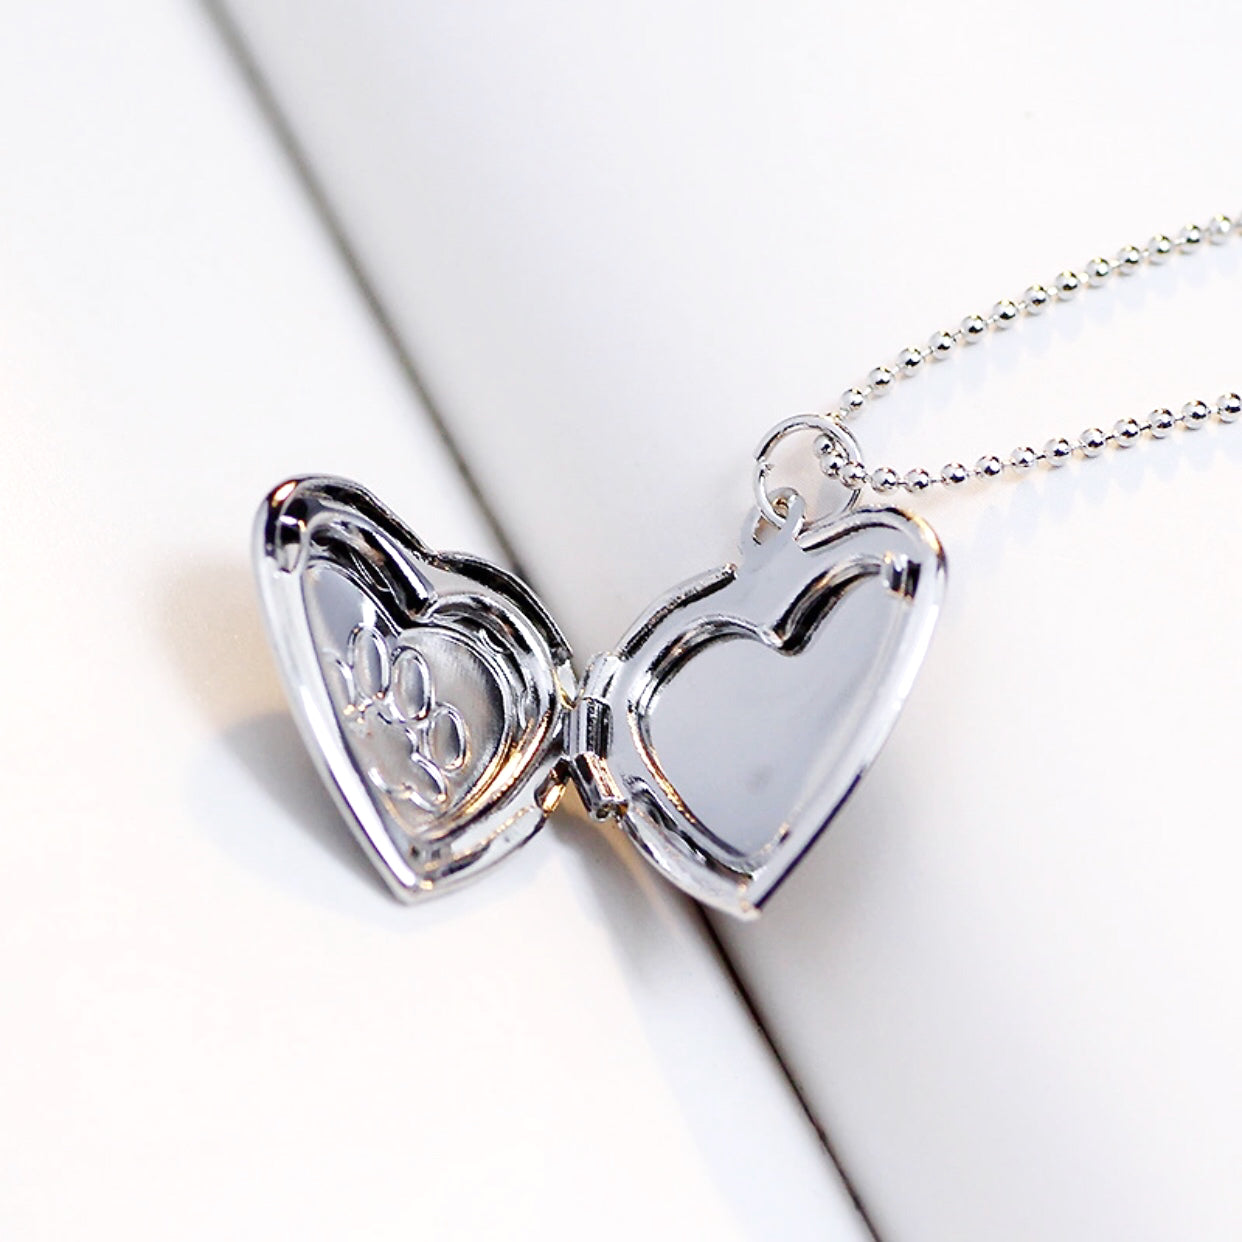 Heart Shaped Dog Paws Print Locket Pendant For Woman